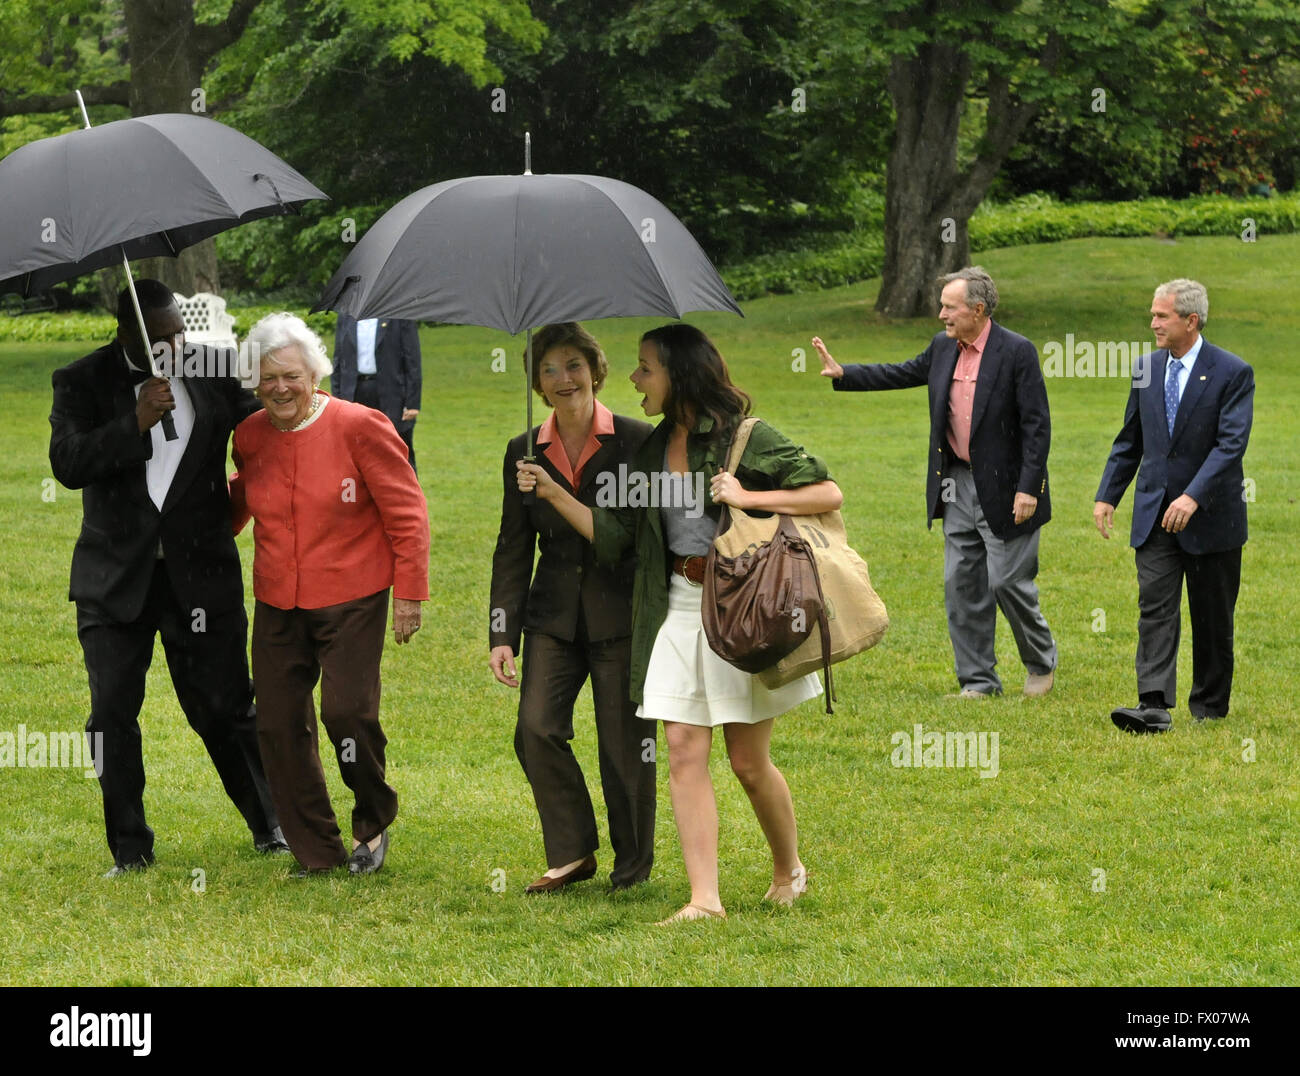 May 11, 2008 - Washington, District of Columbia, United States of America - Former United States President George H.W. Bush (2nd, R) walks with US President George W. Bush as an aide assists former first lady Barbara Bush and first lady Laura Bush (C) walks with daughter Barbara, as they arrive at the White House from a weekend at the Crawford, Texas ranch, 11 May 2008 in Washington, DC. Bush, whose daughter Jenna married Henry Hager at the ranch, described the experience as 'spectacular' and 'it's all we could have hoped for'. Credit: Mike Theiler/Pool via CNP (Credit Image: © Mike The Stock Photo